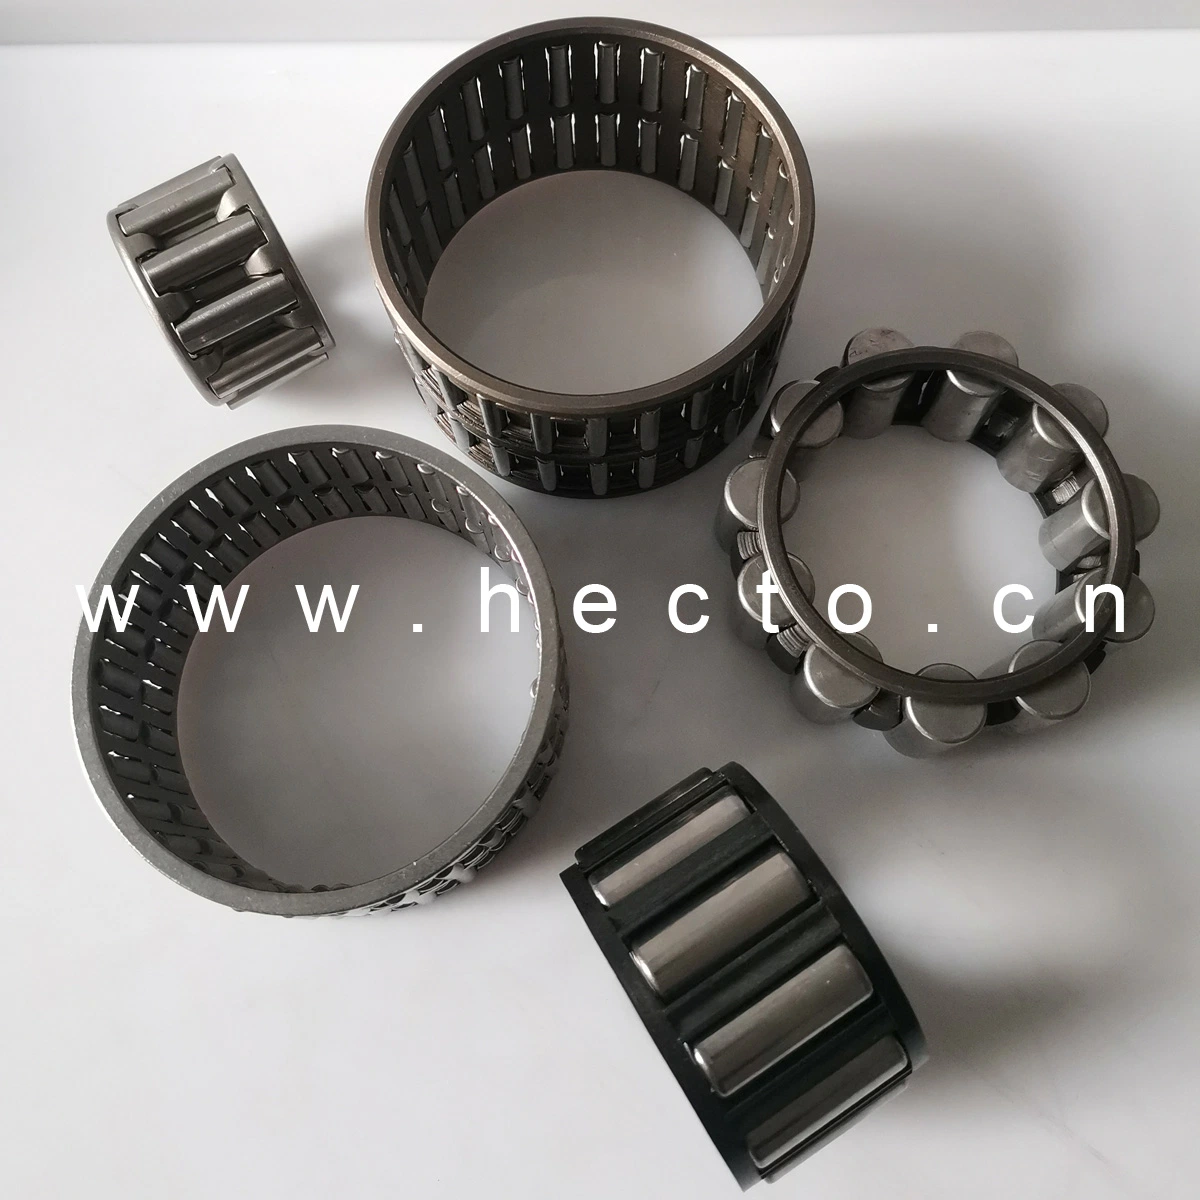 Needle Roller Bearing Needle Roller and Cage Assemblies Needle Bearing Drawn Cup Needle Roller Bearing Pot Bearing Bridge Bearing for Road Bridge Construction